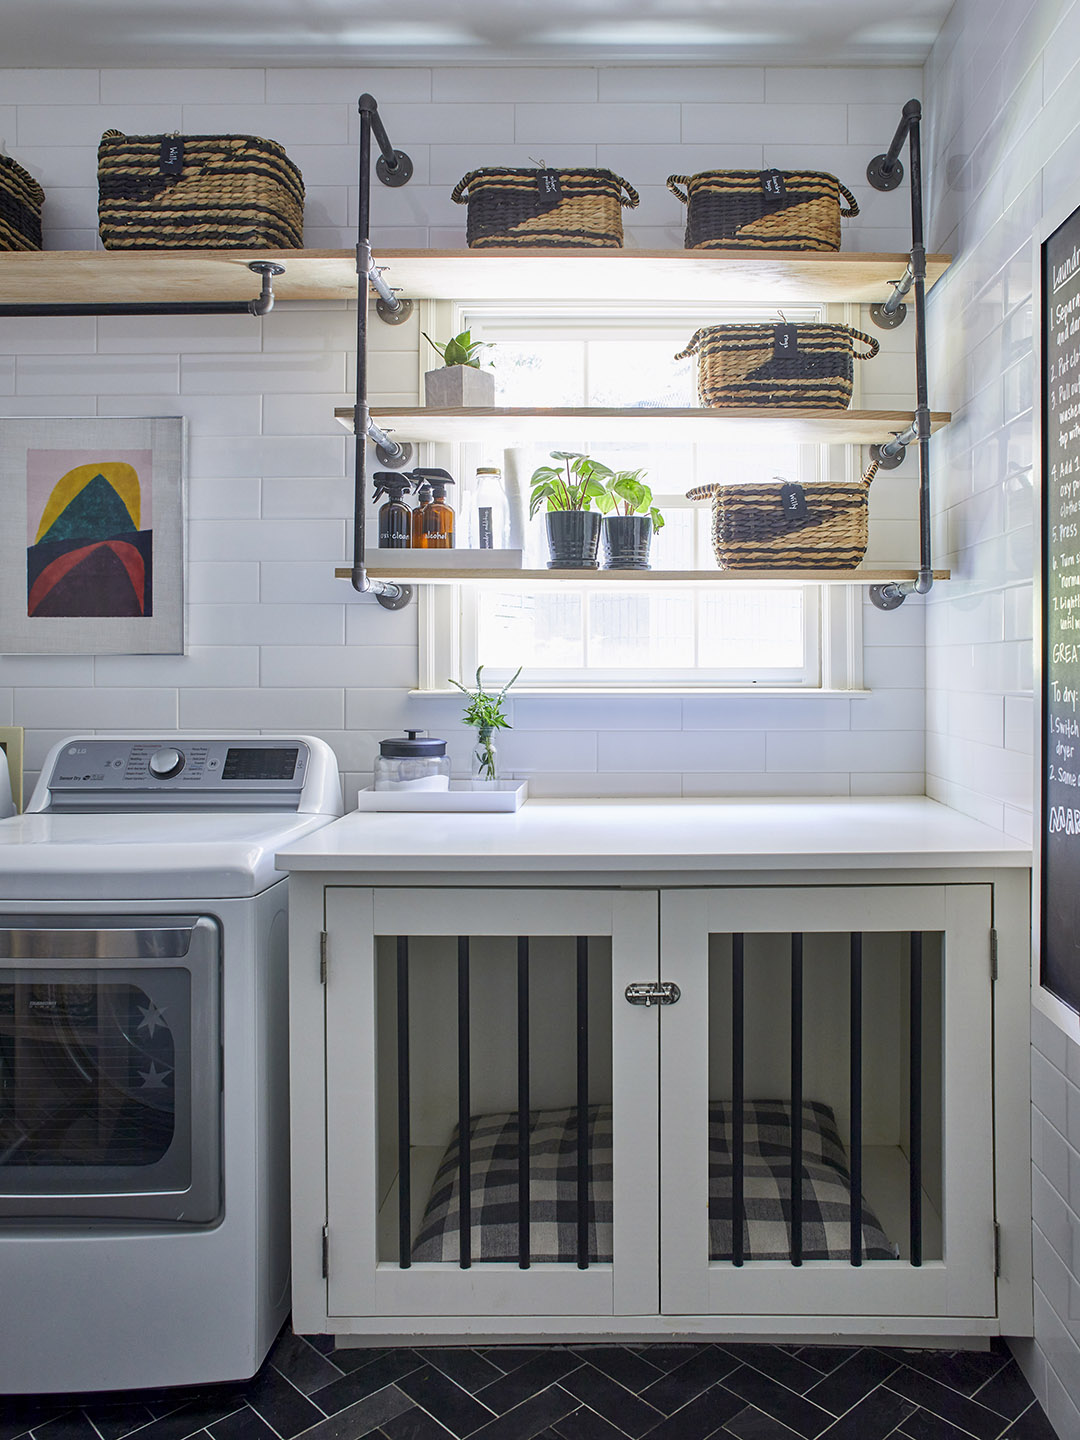 laundry room with pet nook